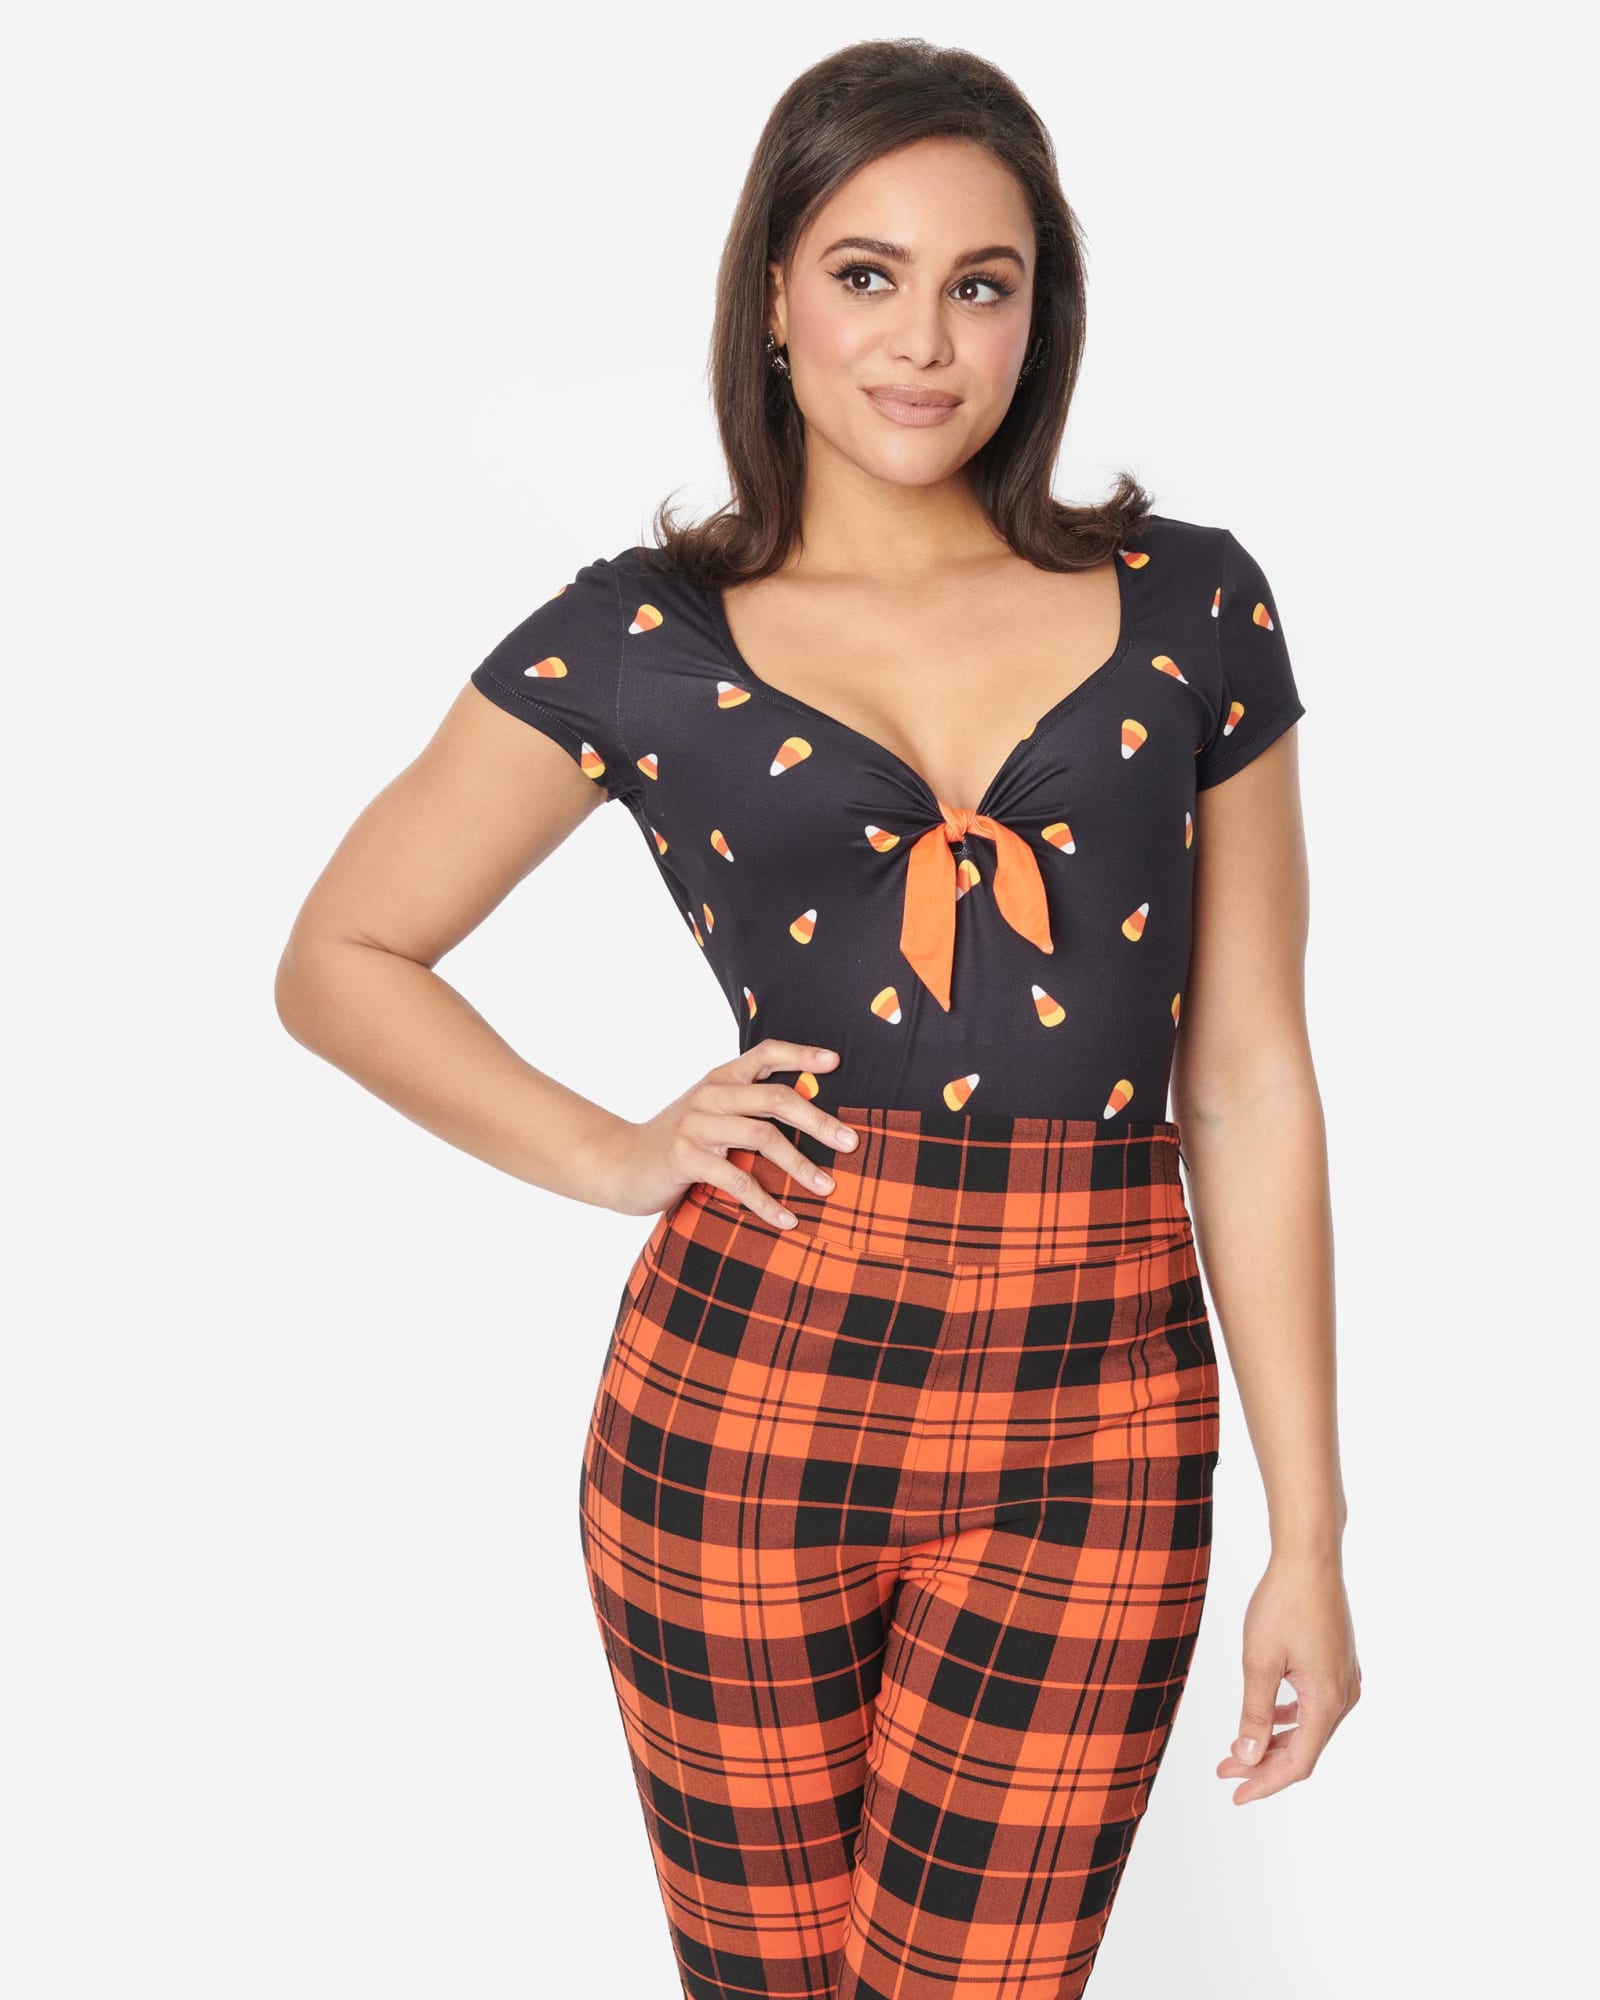 Unique Vintage Black Candy Corn Sweetheart Rosemary Top | Black, candy corn print